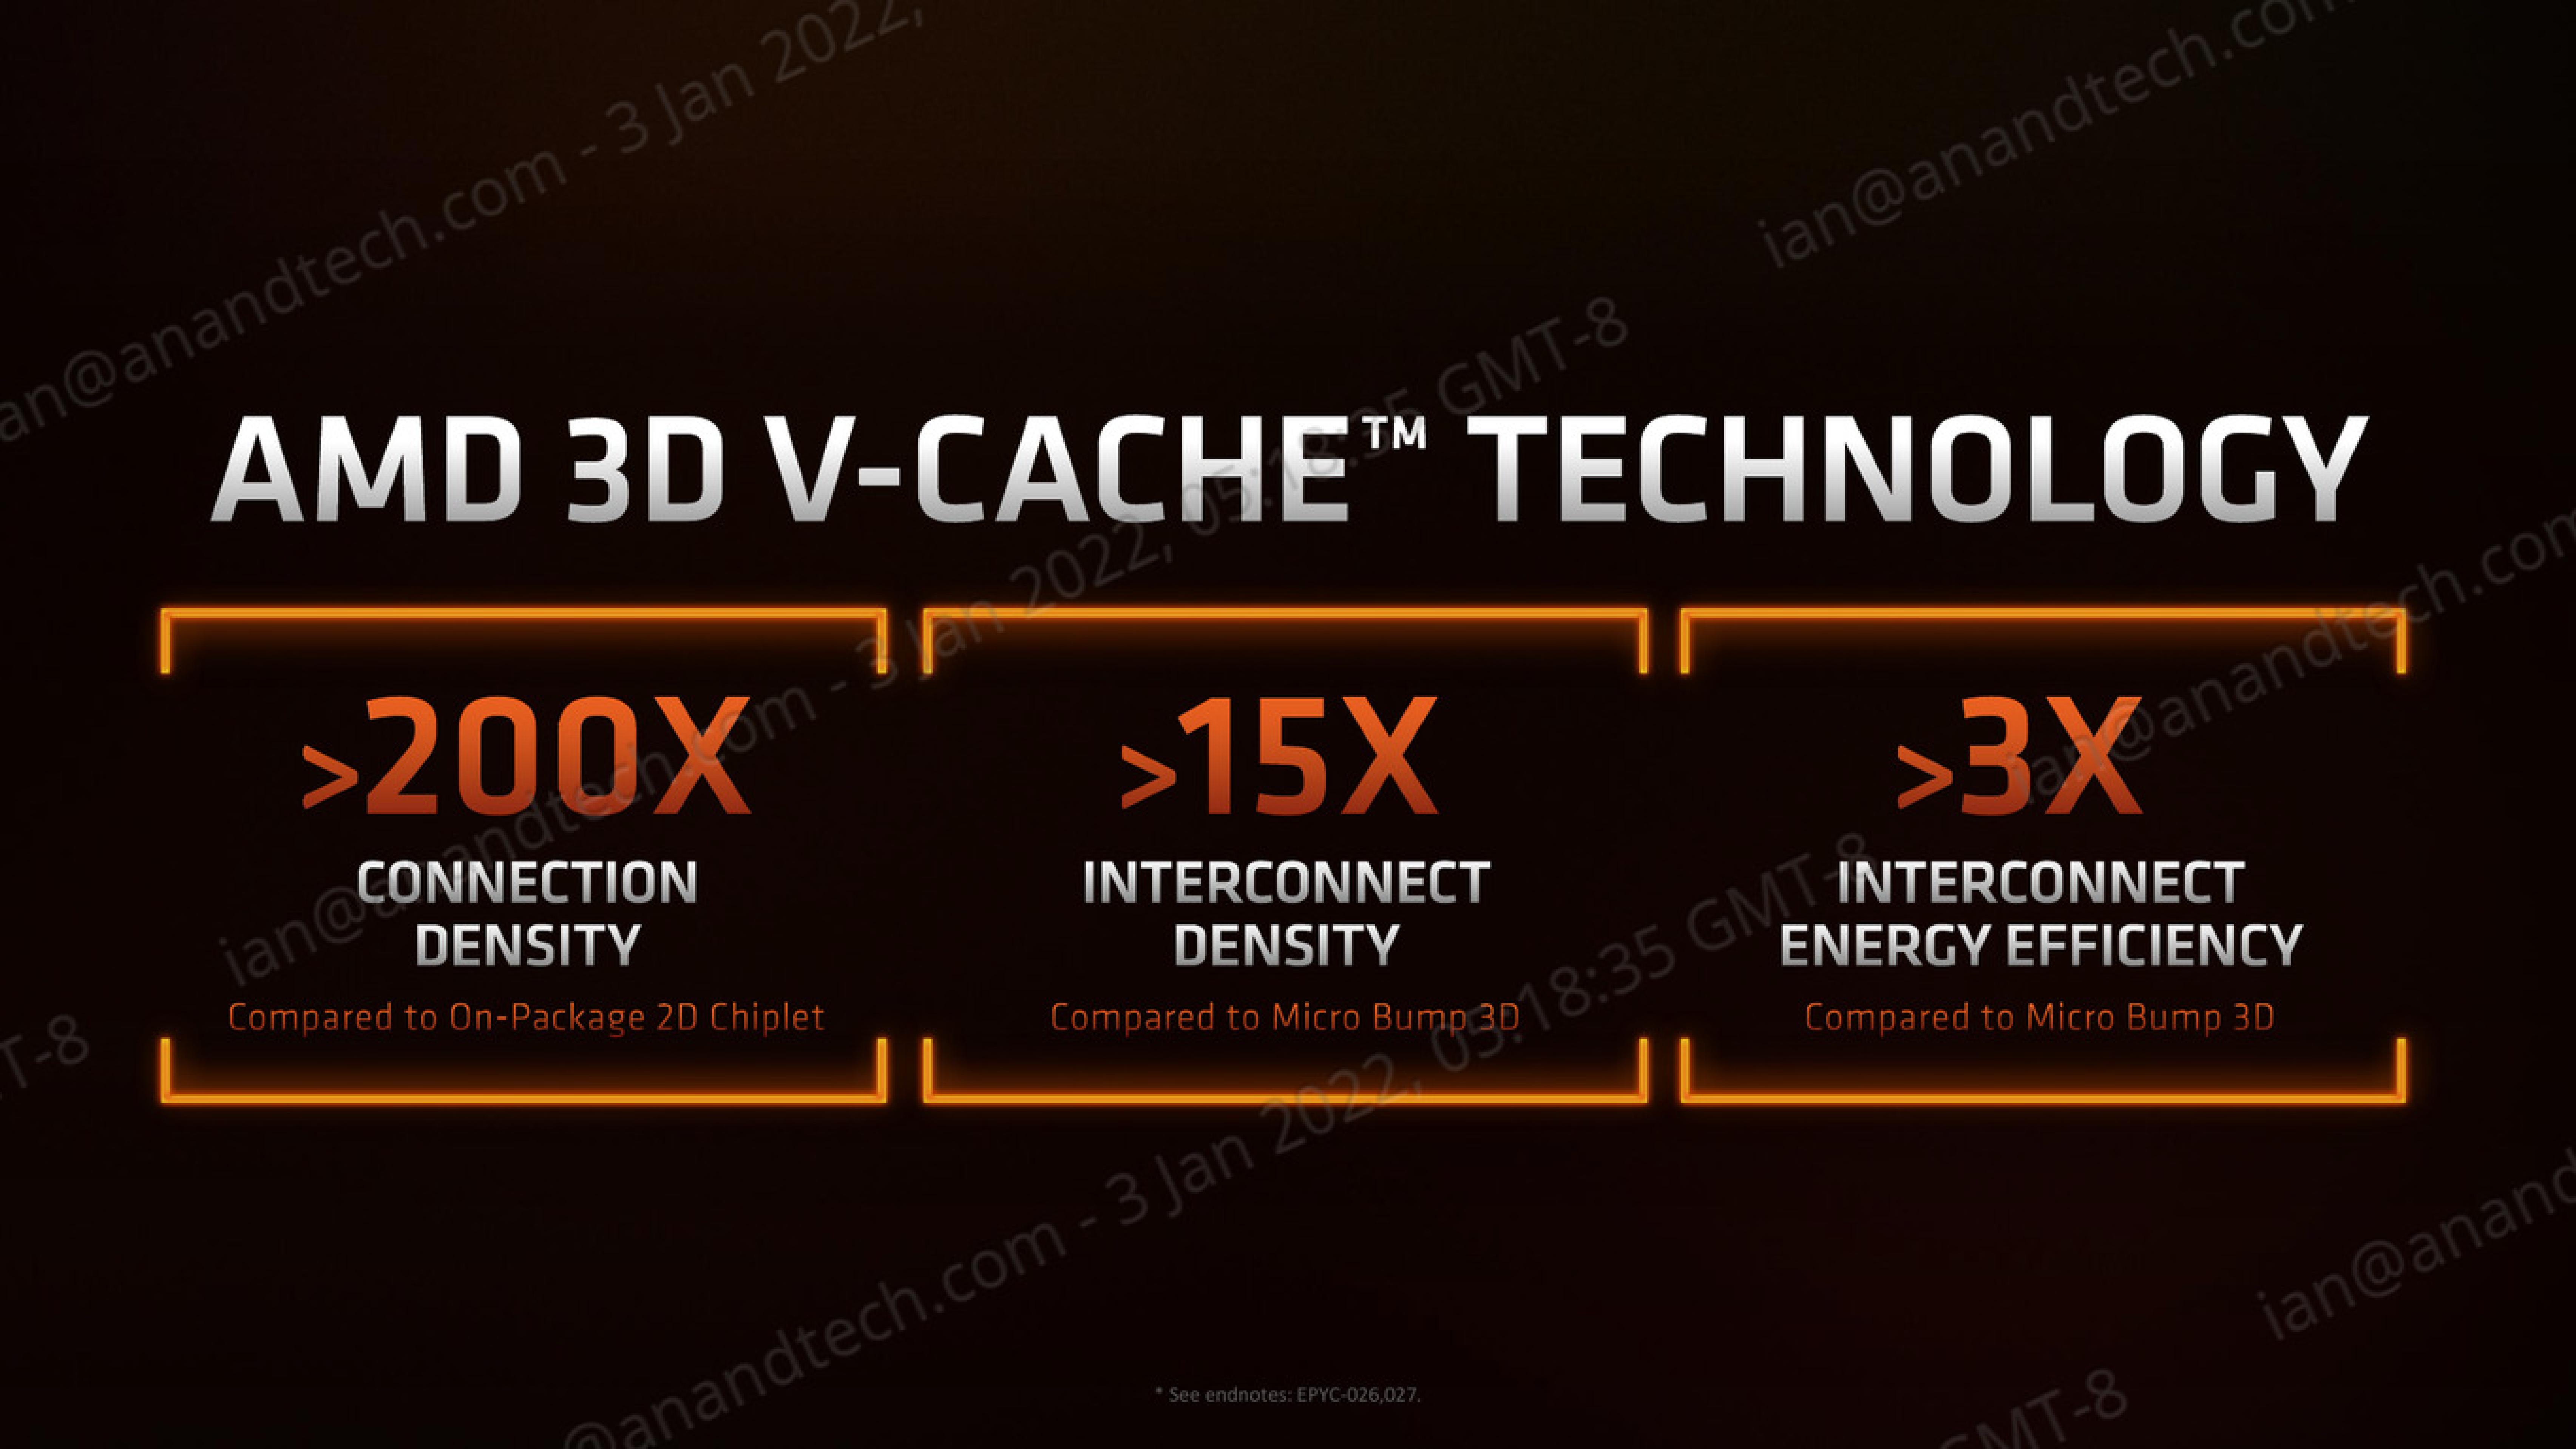 AMD reveals surprising reason why the Ryzen 7 5800X3D is not overclockable  -  News